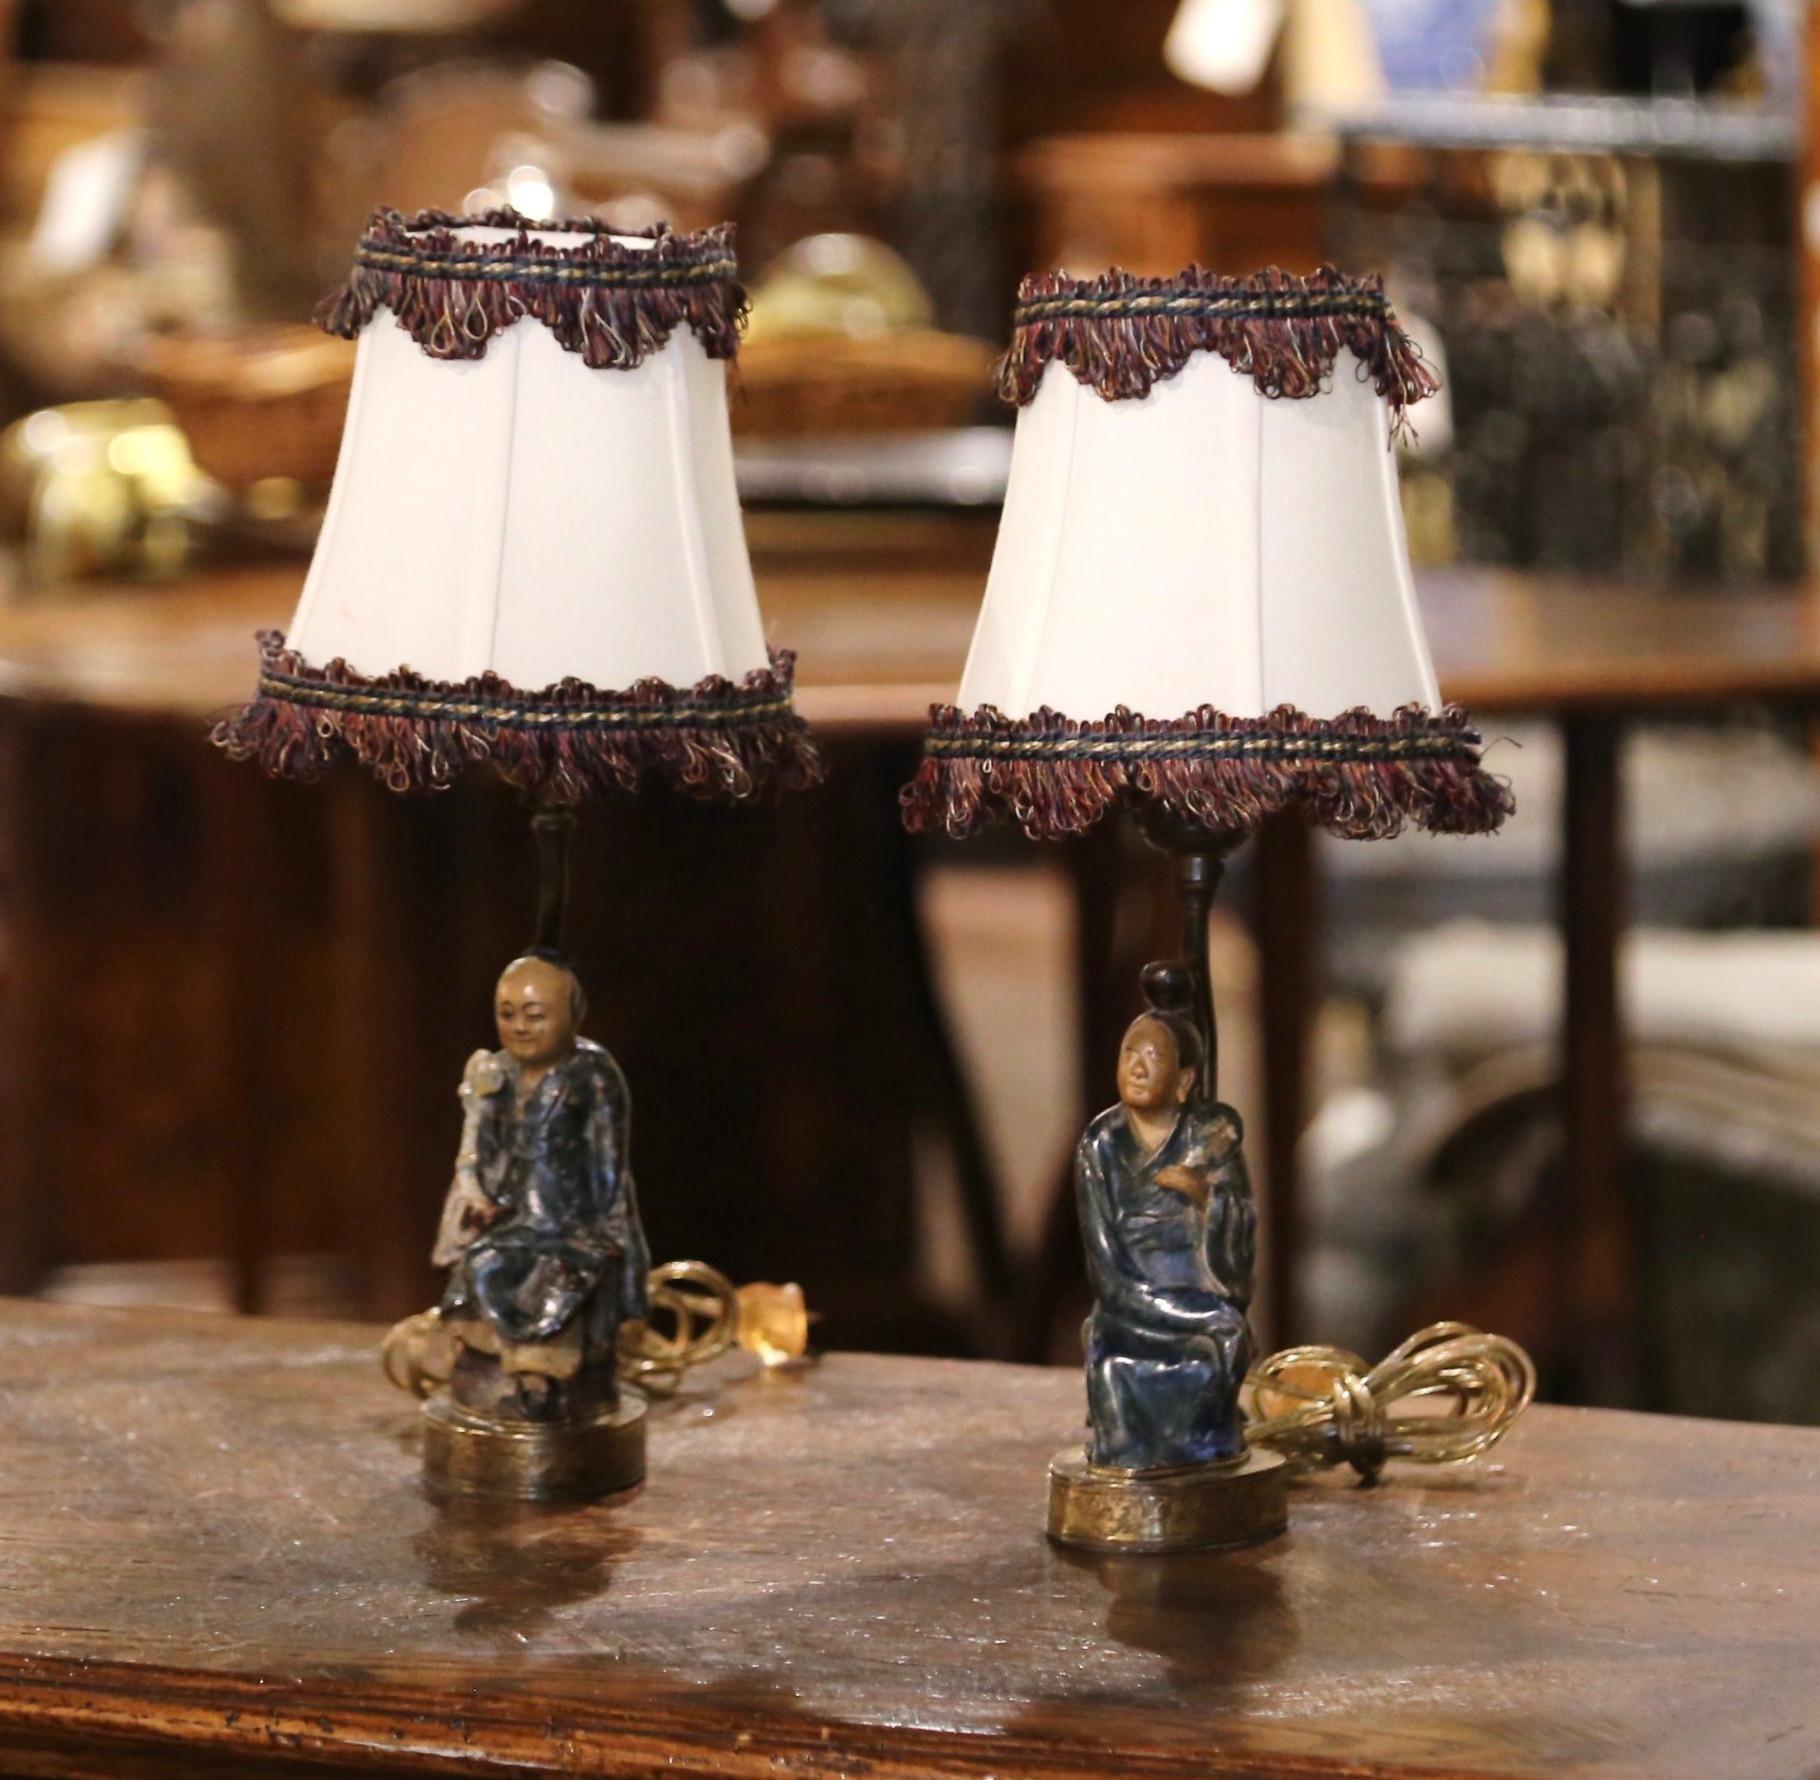 Place these colorful antique lamps on bedside tables, or use them on shelves in a library or study. Created in Asia circa 1890, one lamp stands on a intricate brass base, and depicts an Asian man and woman, both in a sited position. Both petite